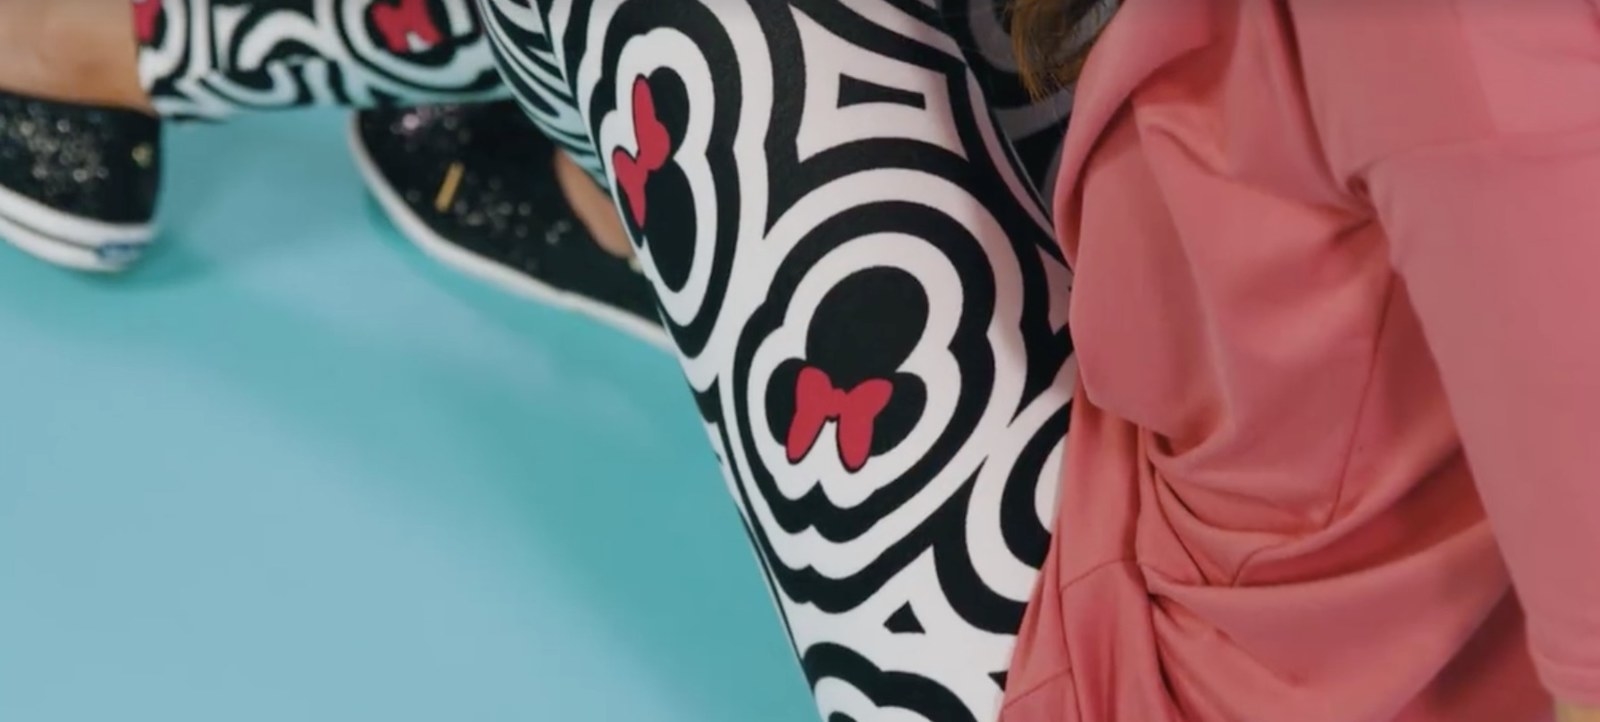 Just in time for your next Disney vacation! The LuLaRoe Collection